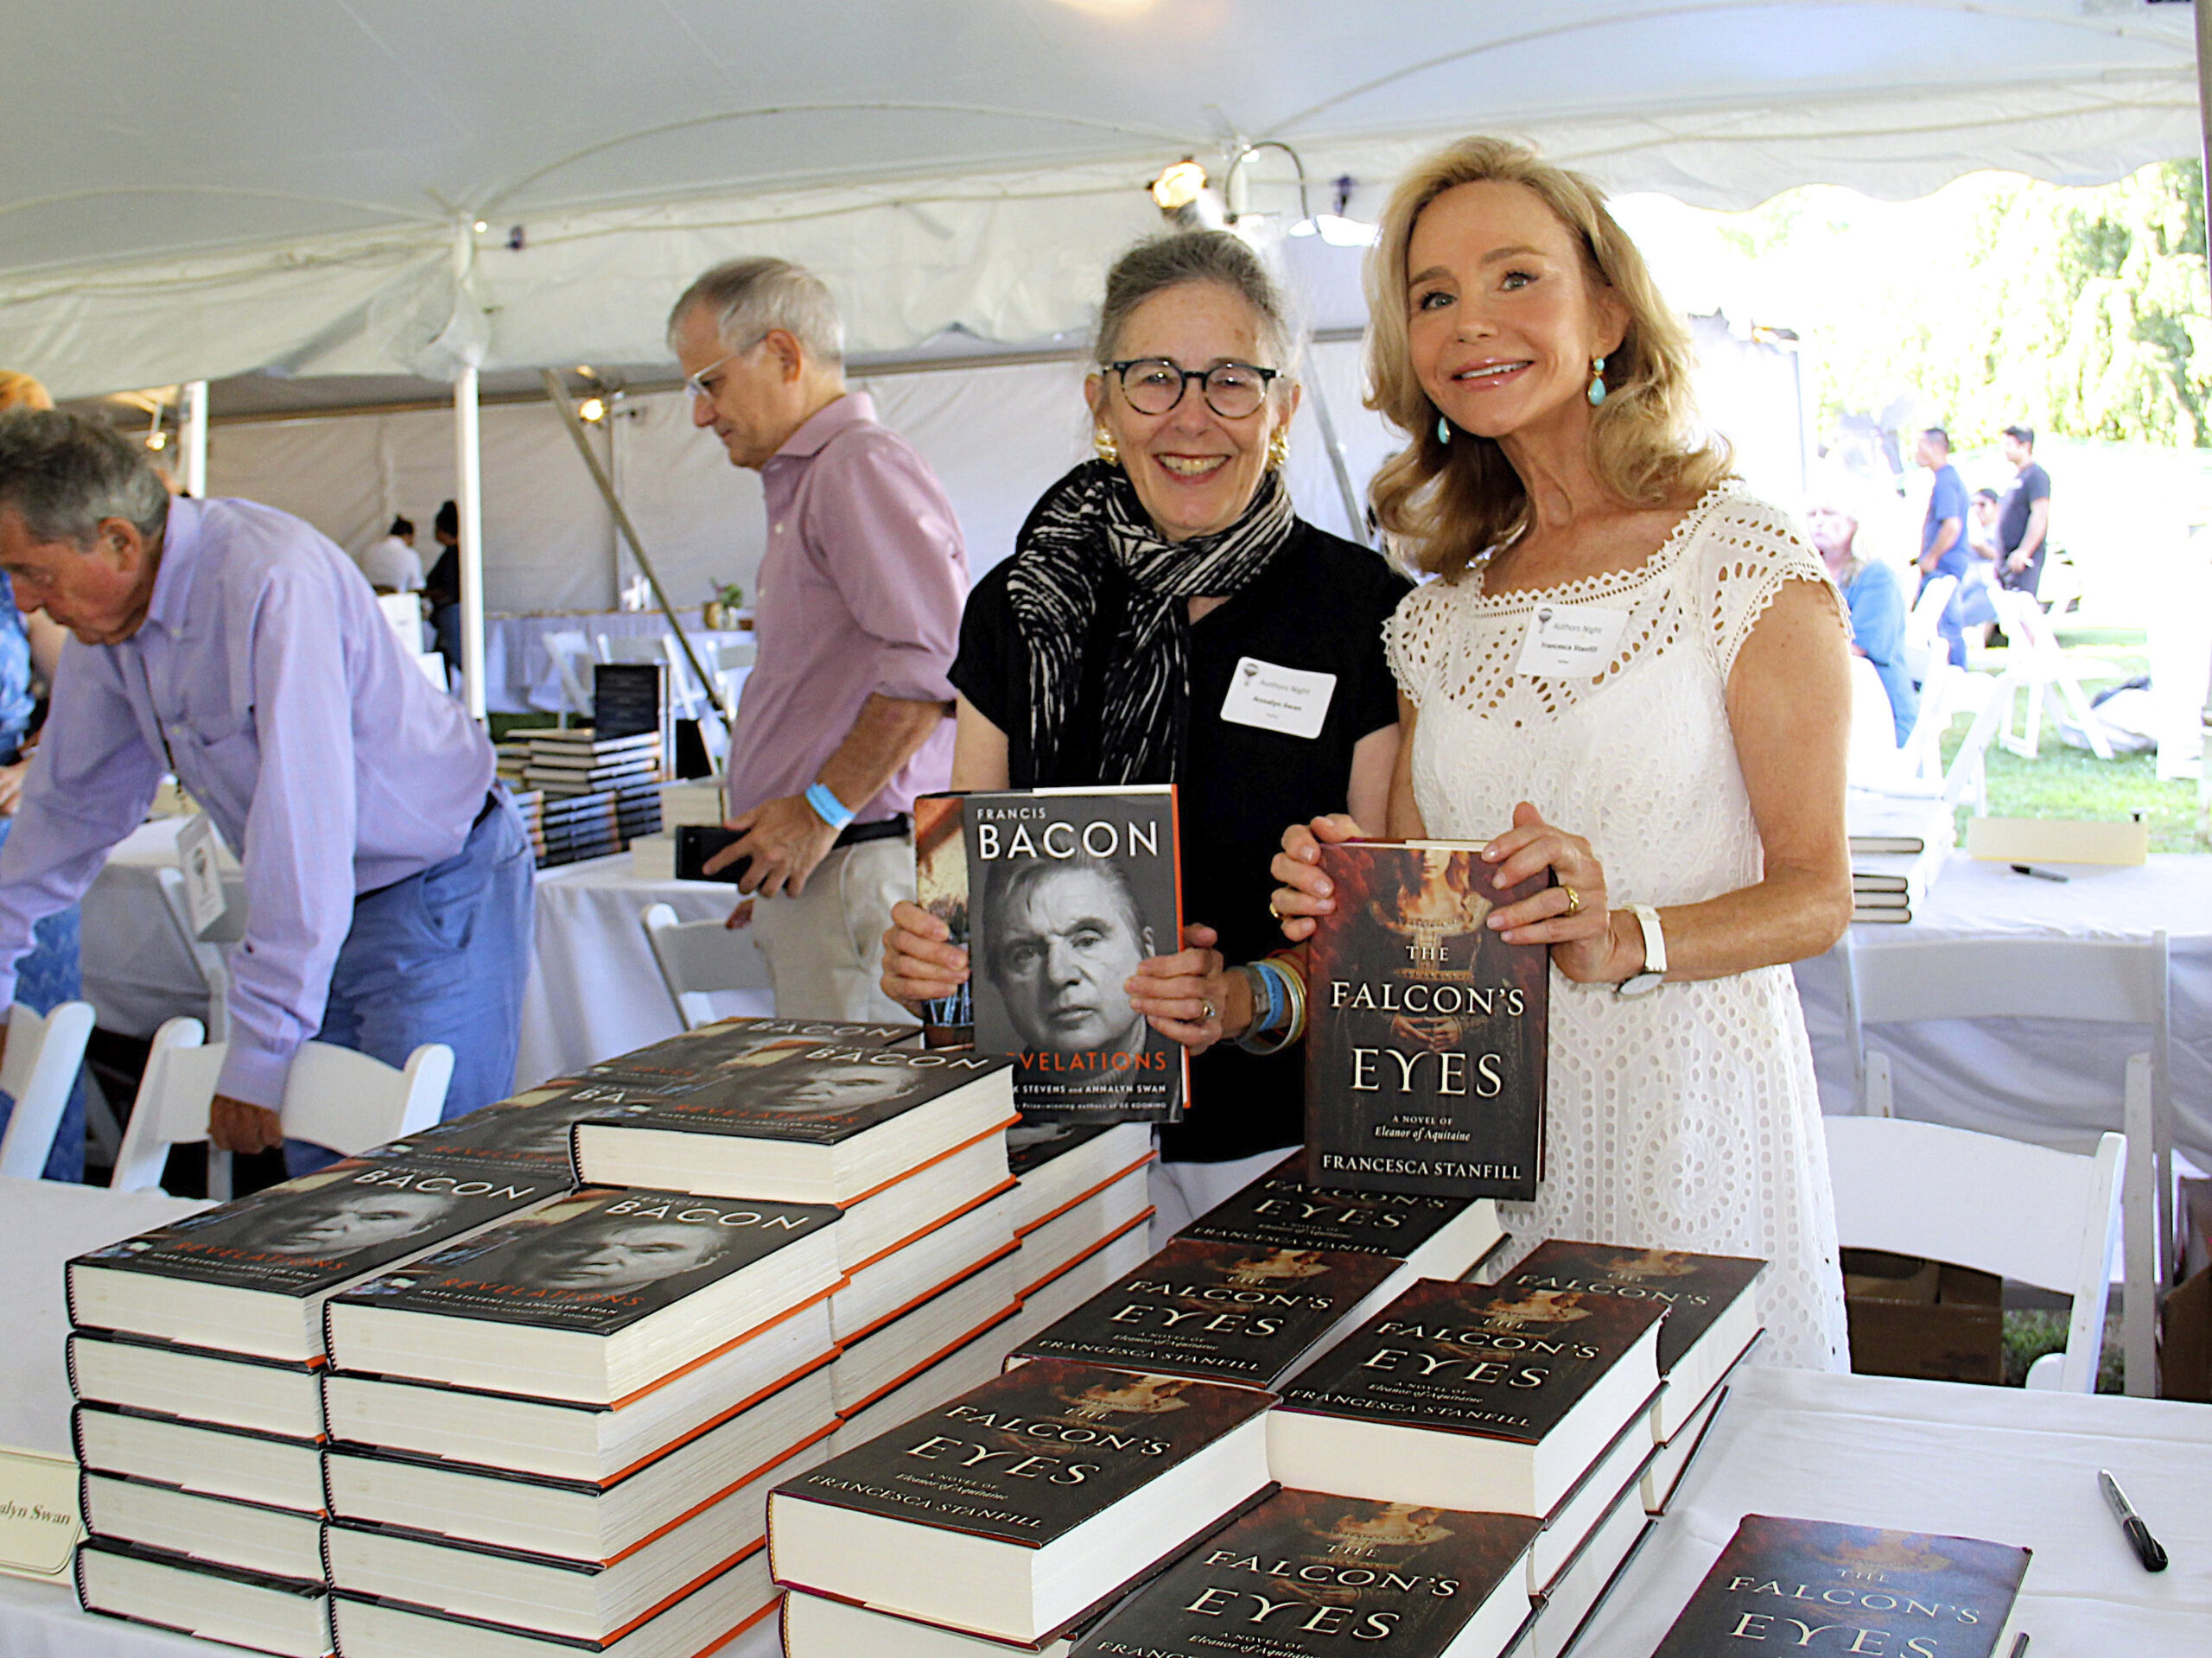 Authors Annalyn Swan and Francesca Stanfill